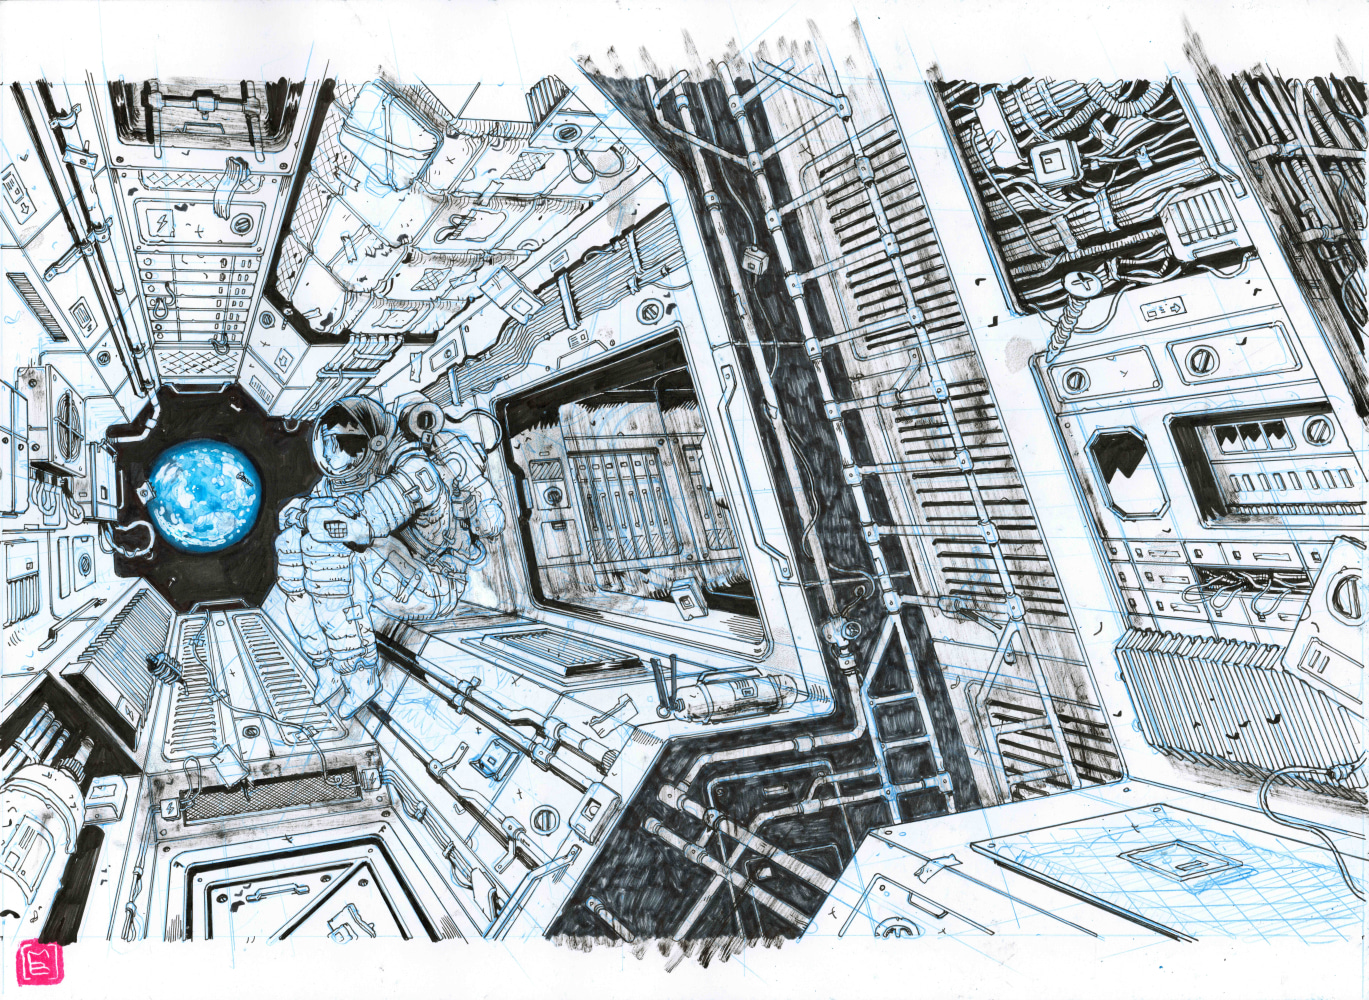 Mathieu Bablet

Couverture Manga - Planet, 2022

Inactinic np and china ink on paper

Framed: 15 1/2 x 20 1/4 inches

$4,800 - Sold